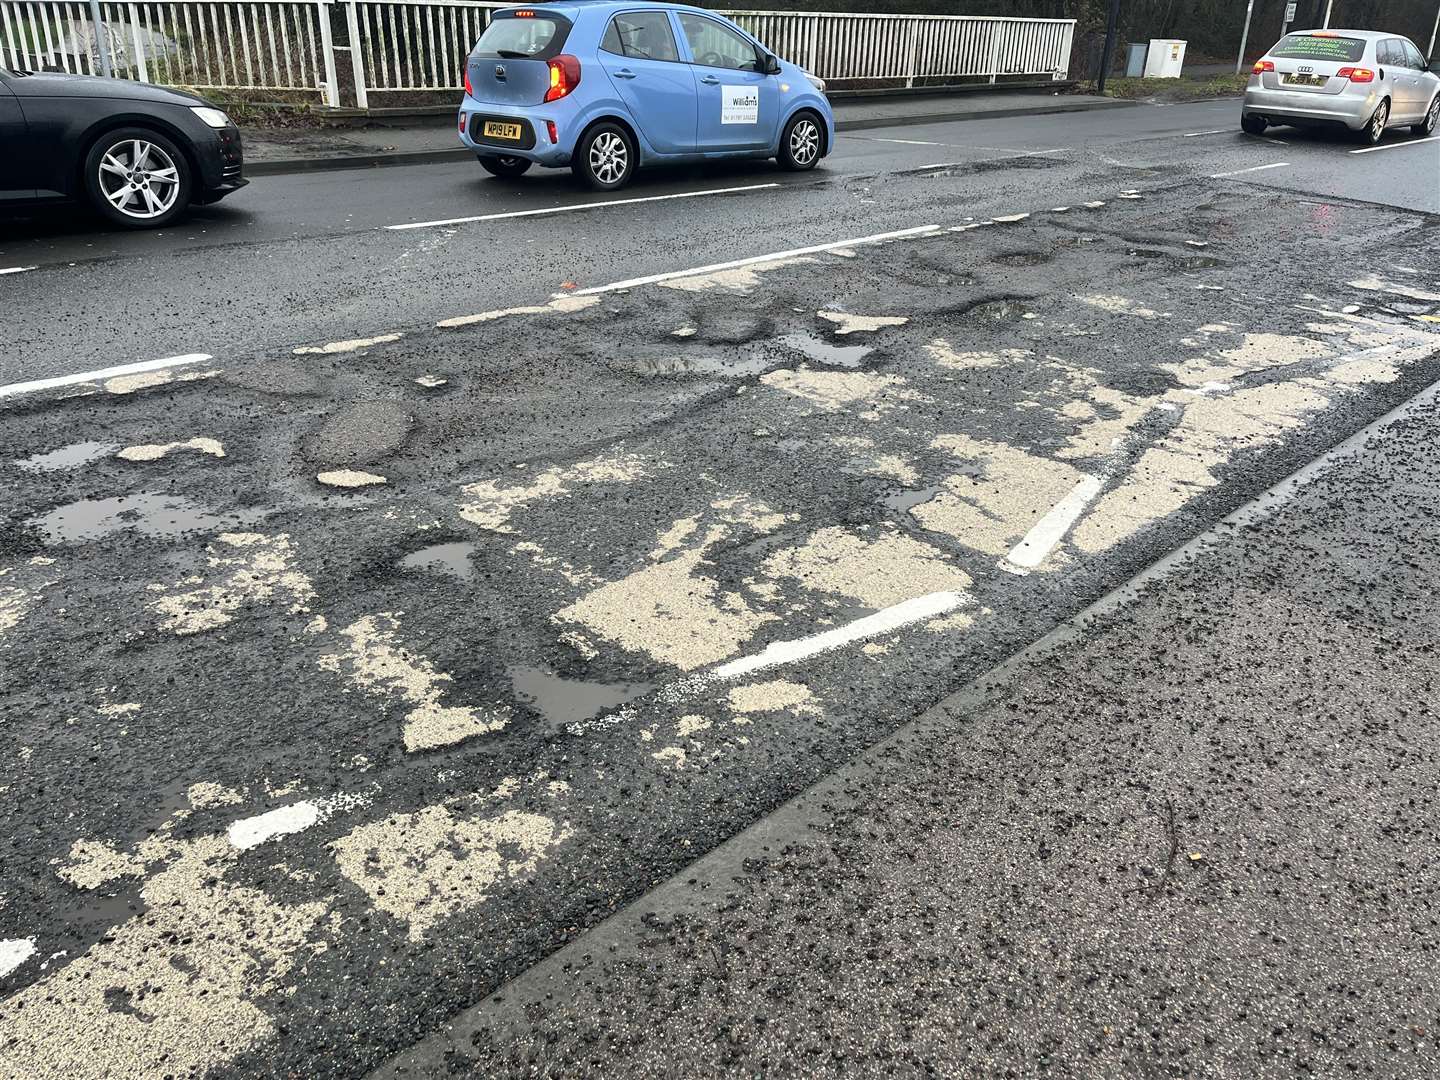 What the road looked like before repairs were made today